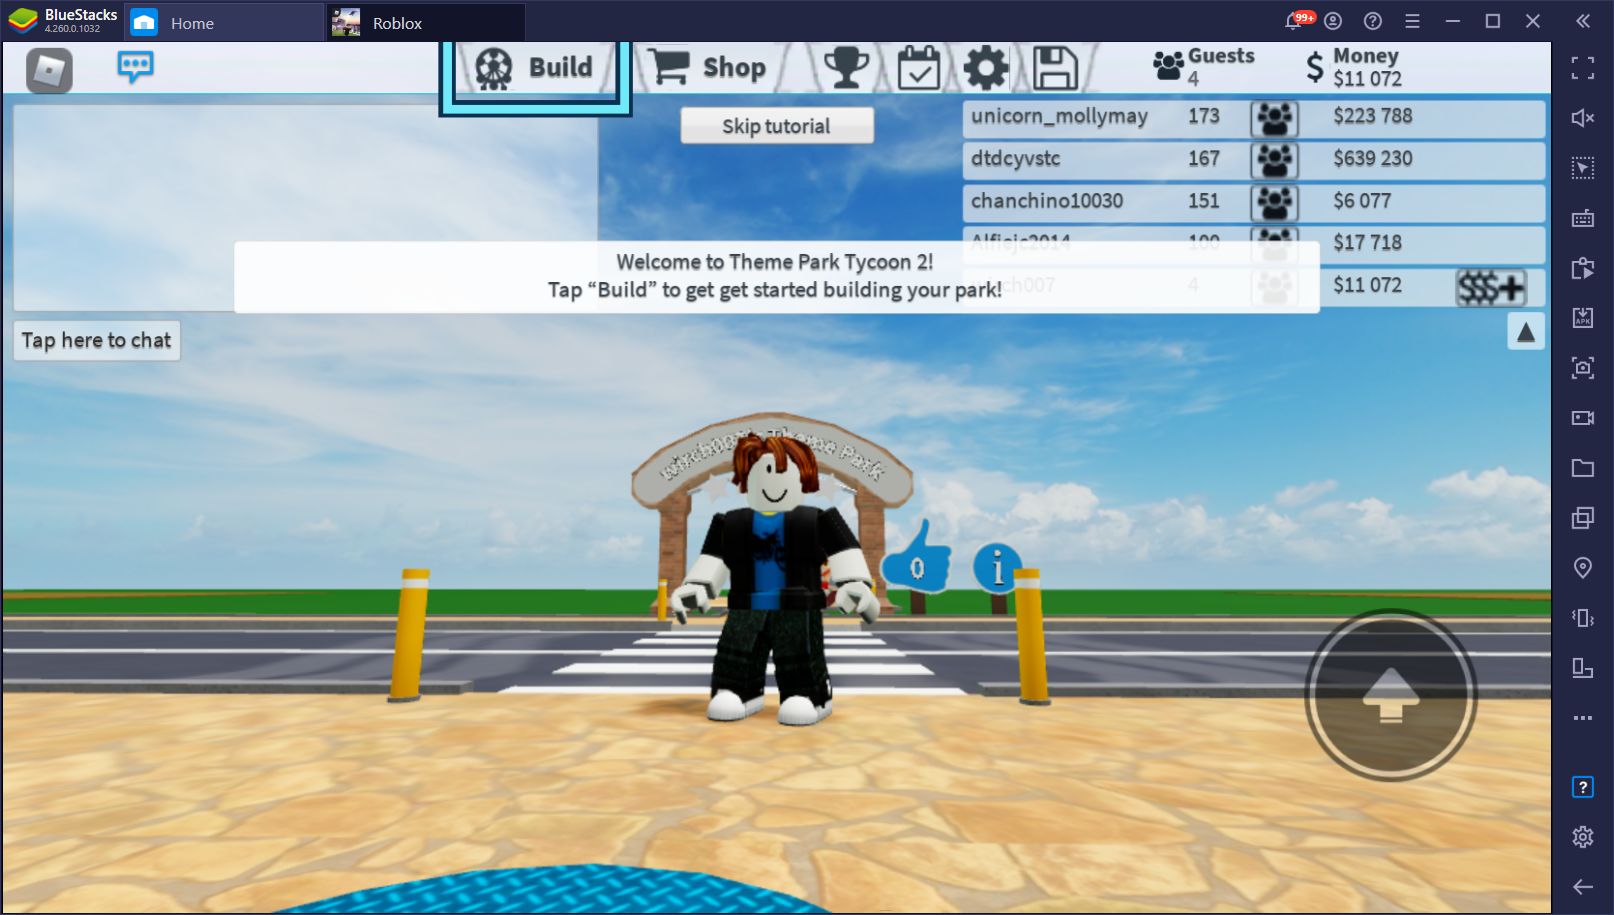 The Best Roblox Games To Play In 2021 Bluestacks - best simulators on roblox 2021